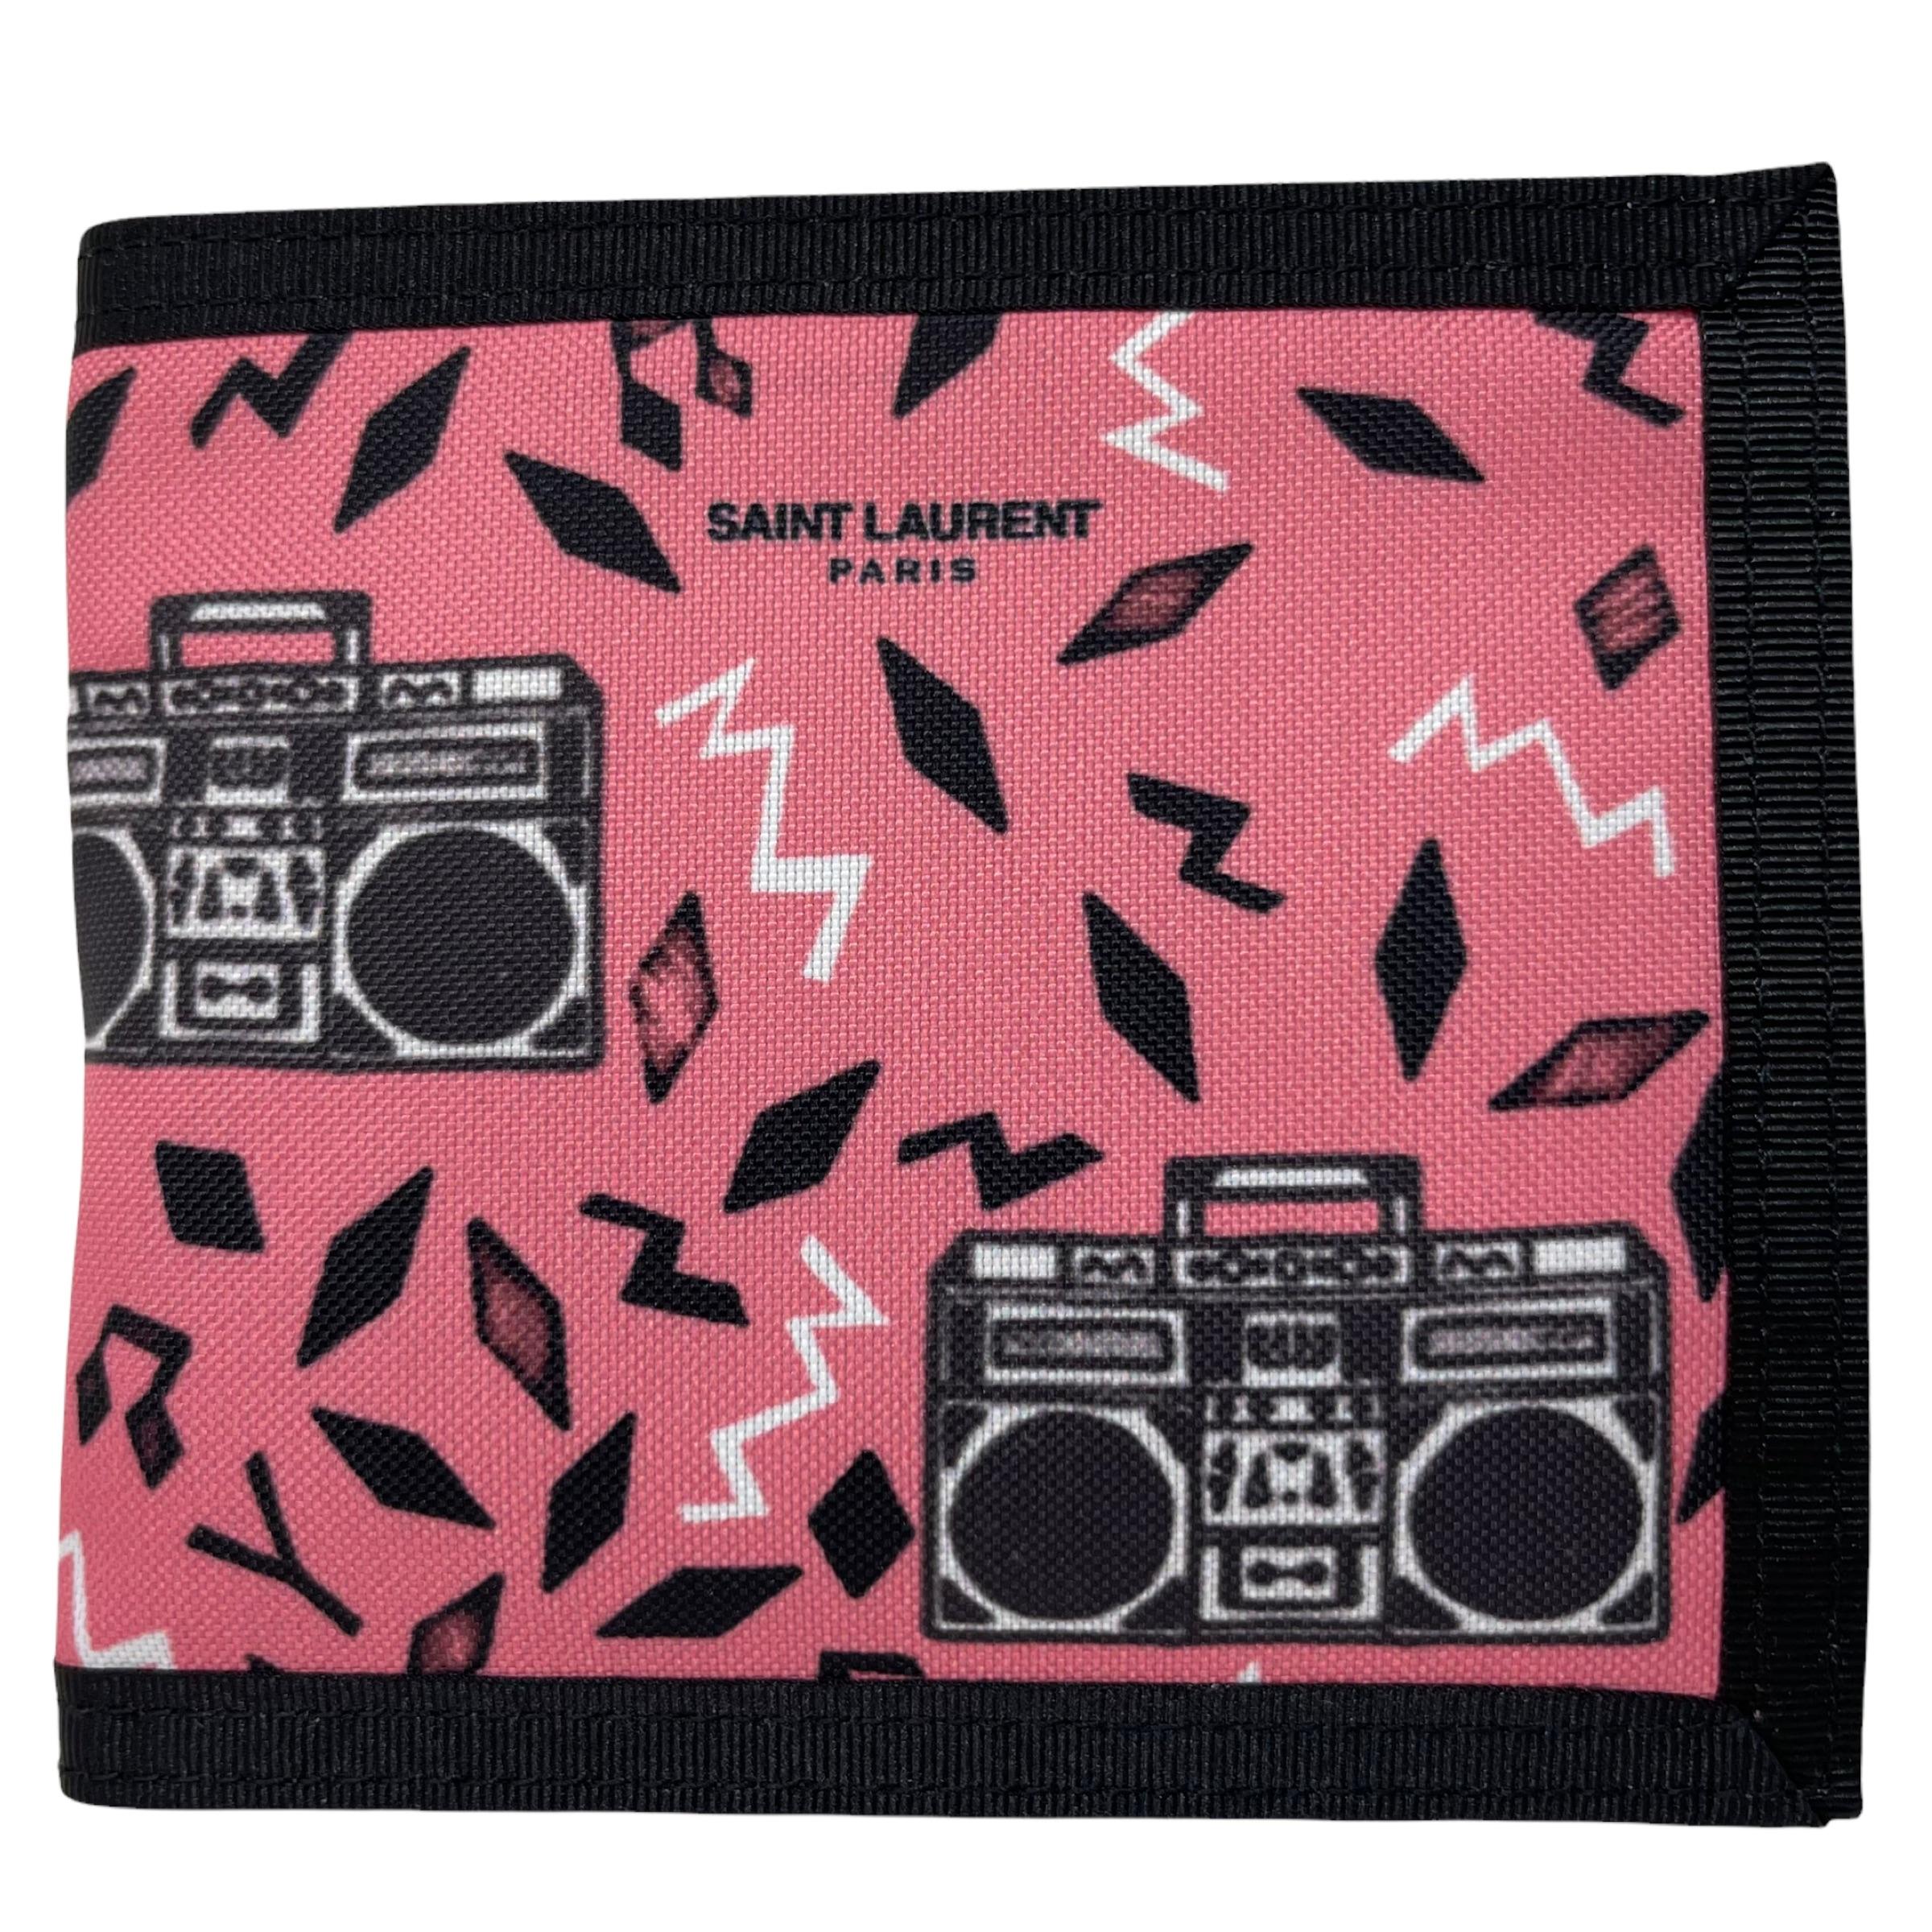 New Saint Laurent Pink Orion Radio Print Nylon Bifold Wallet Card Case

Authenticity guaranteed

DETAILS
Brand: Saint Laurent
Condition: Brand new
Gender: Unisex
Category: Wallet
Color: Pink
Material: Nylon
Radio print
1 bill compartment
2 slip